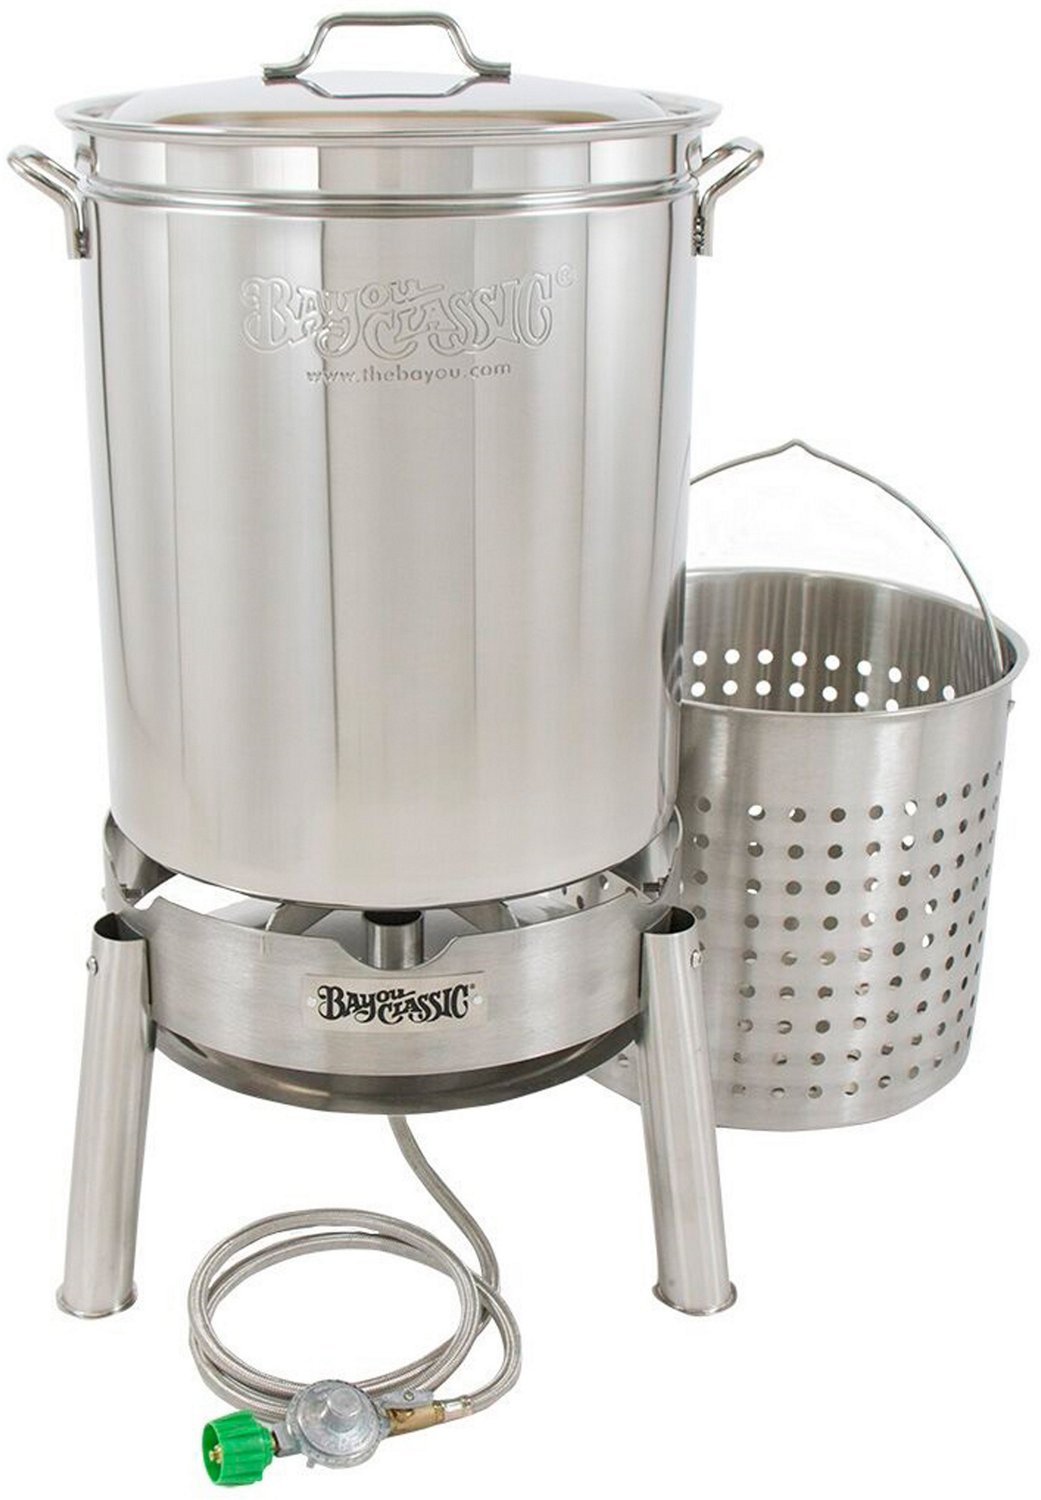 Bayou Classic 62 qt Stainless Cooker Kit | Academy